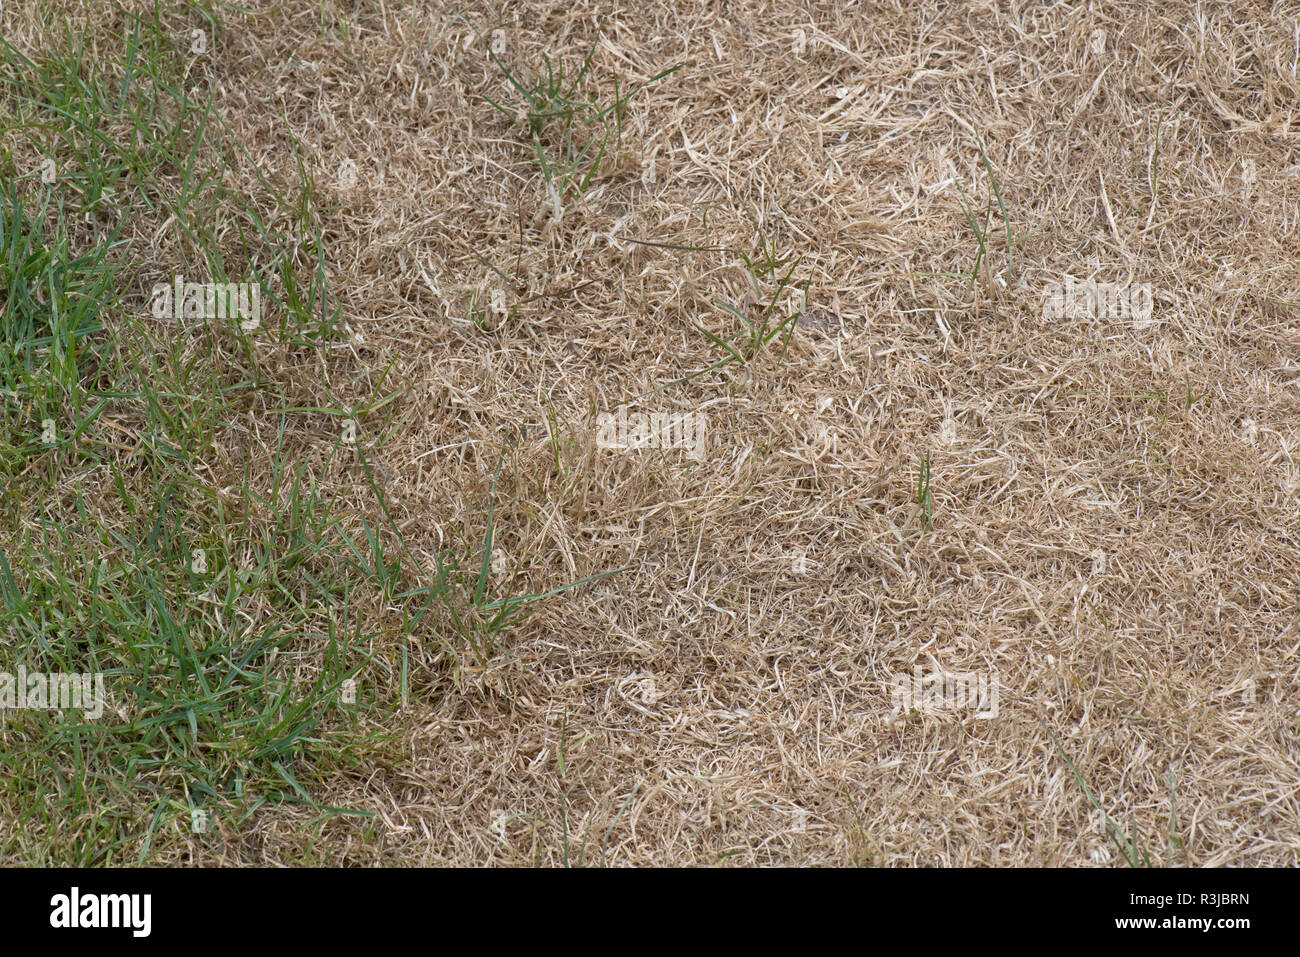 Parched, brown and dry garden lawn grass in a hot summer drought, Berkshire, July Stock Photo